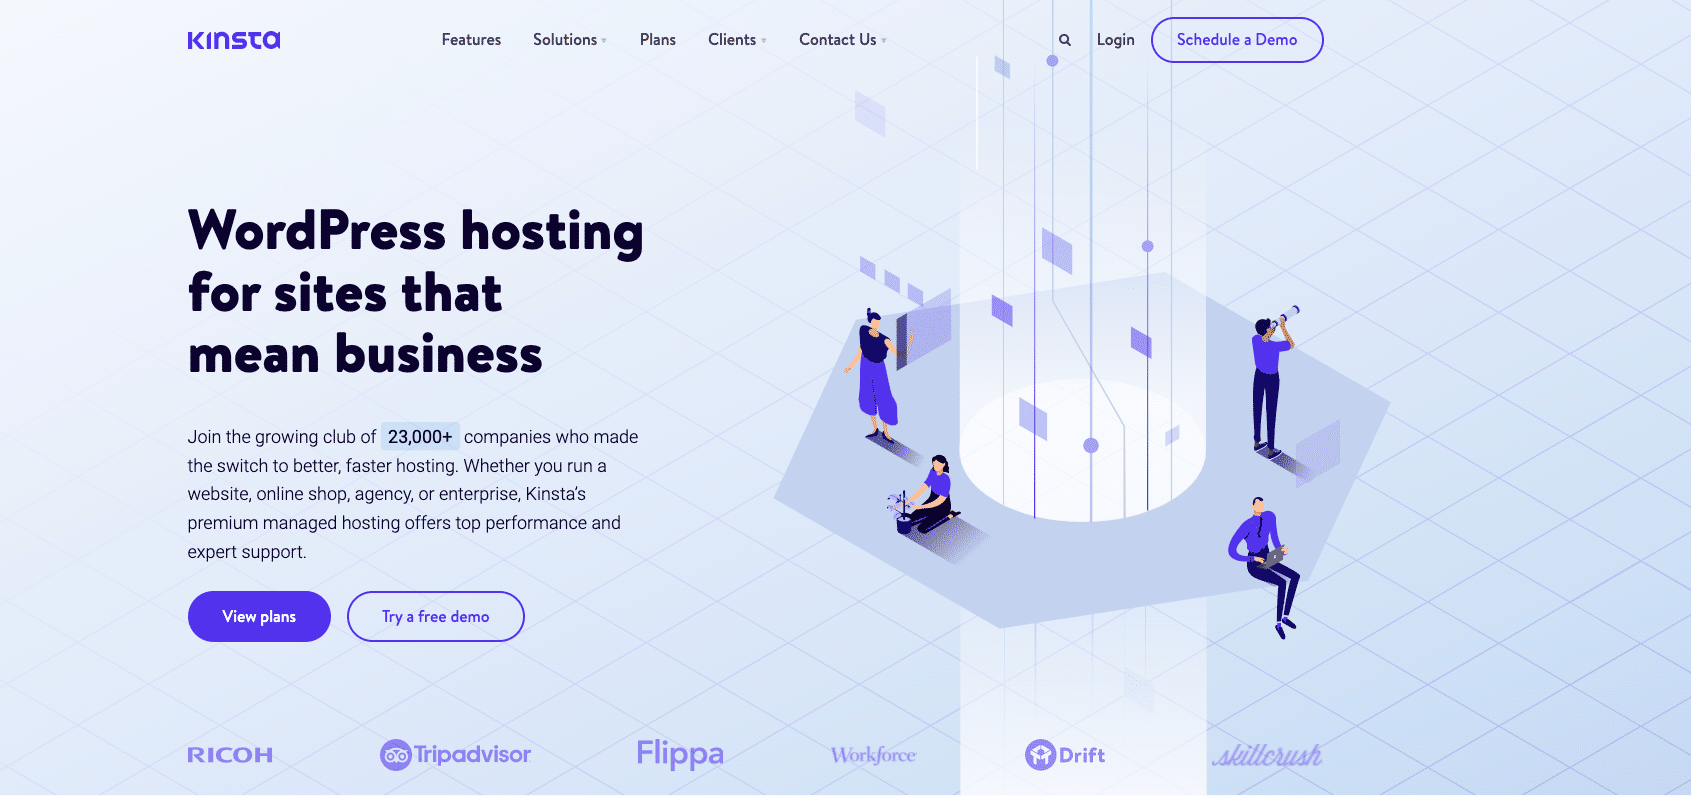 Above the fold on the Kinsta home page